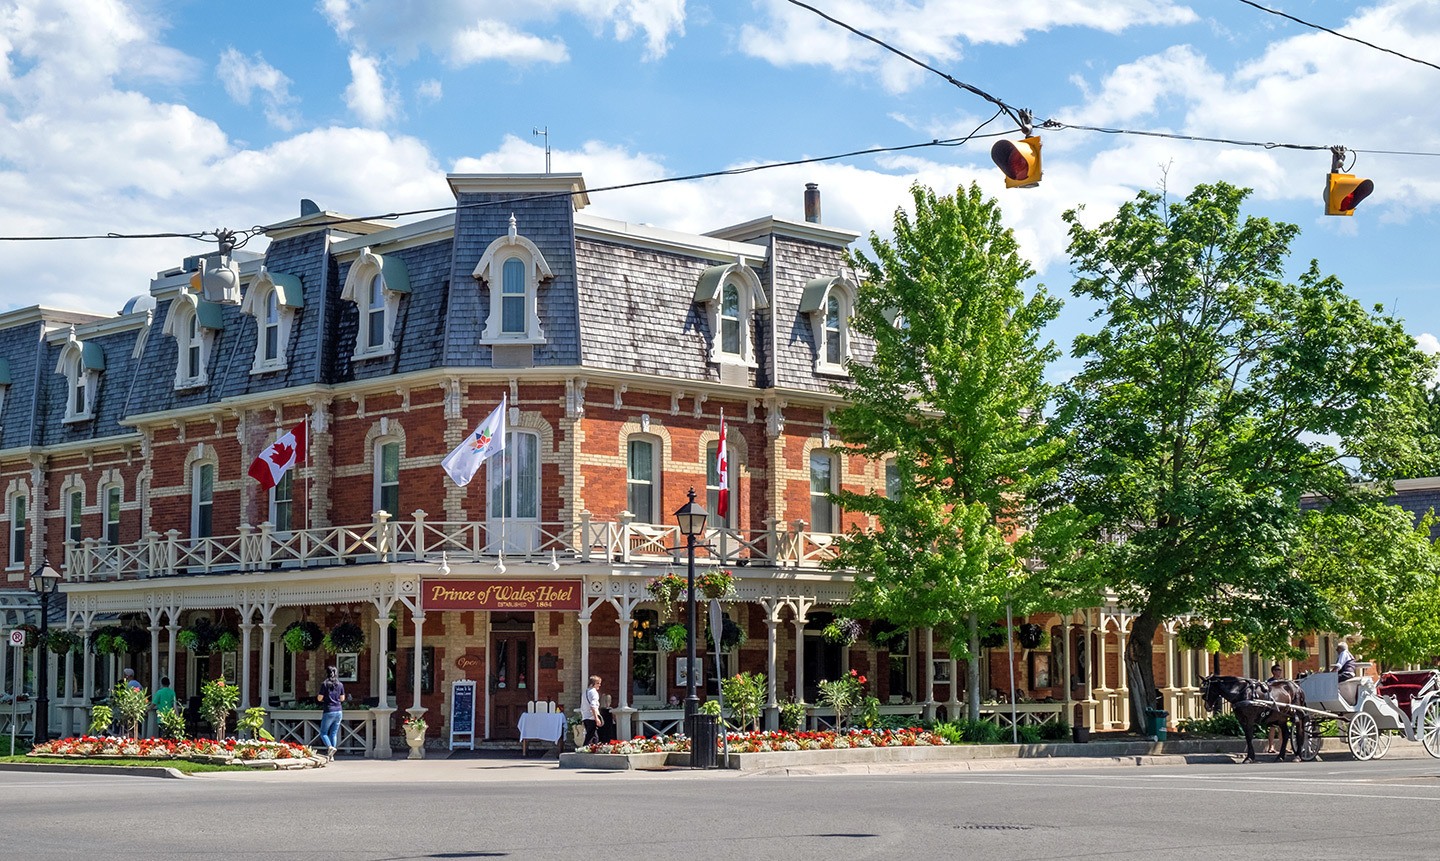 The Prince of Wales Hotel in Niagara-on-the-Lake, Canada